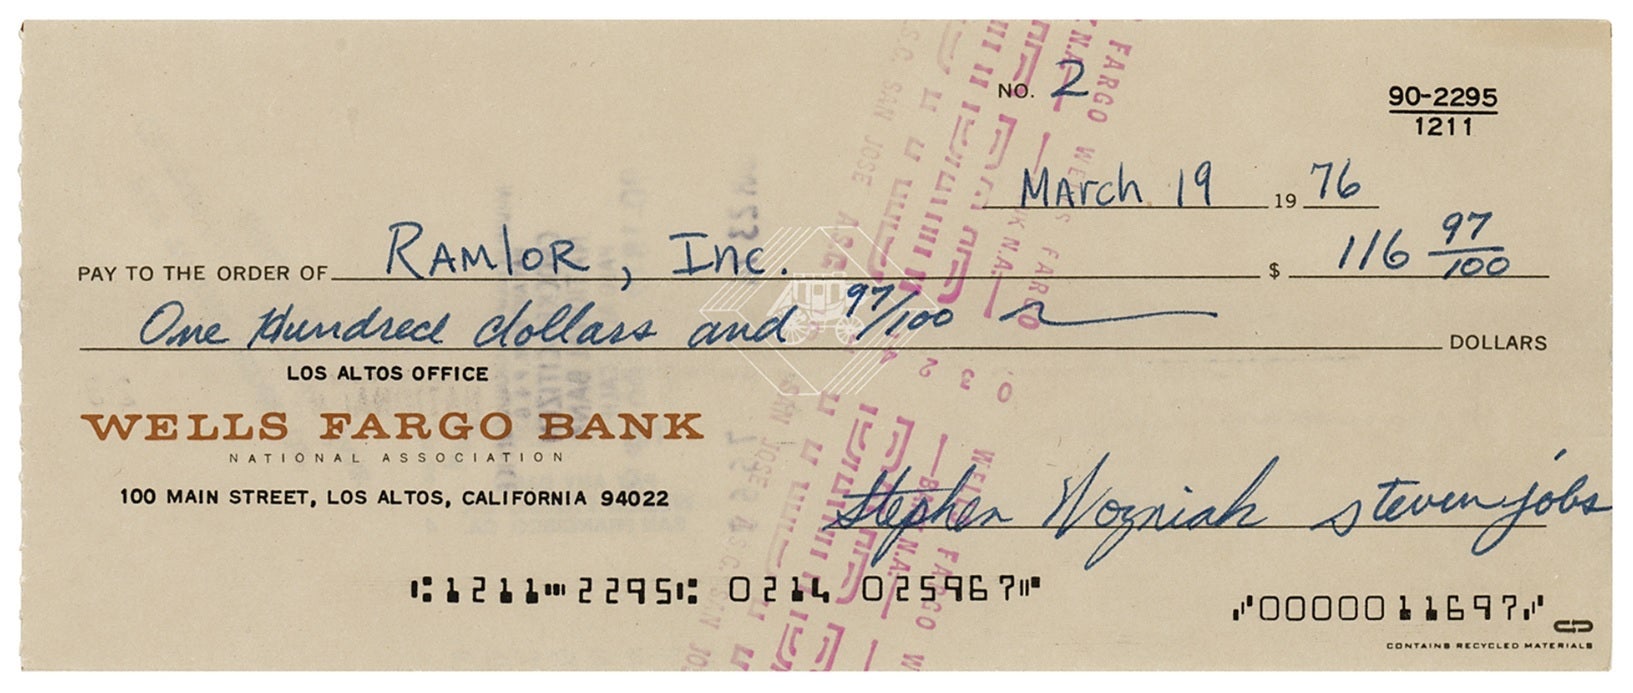 Image Credit–RR Auction - Apple&#039;s $116.97 check signed by Steve Jobs and Steve Wozniak sold for $135,261